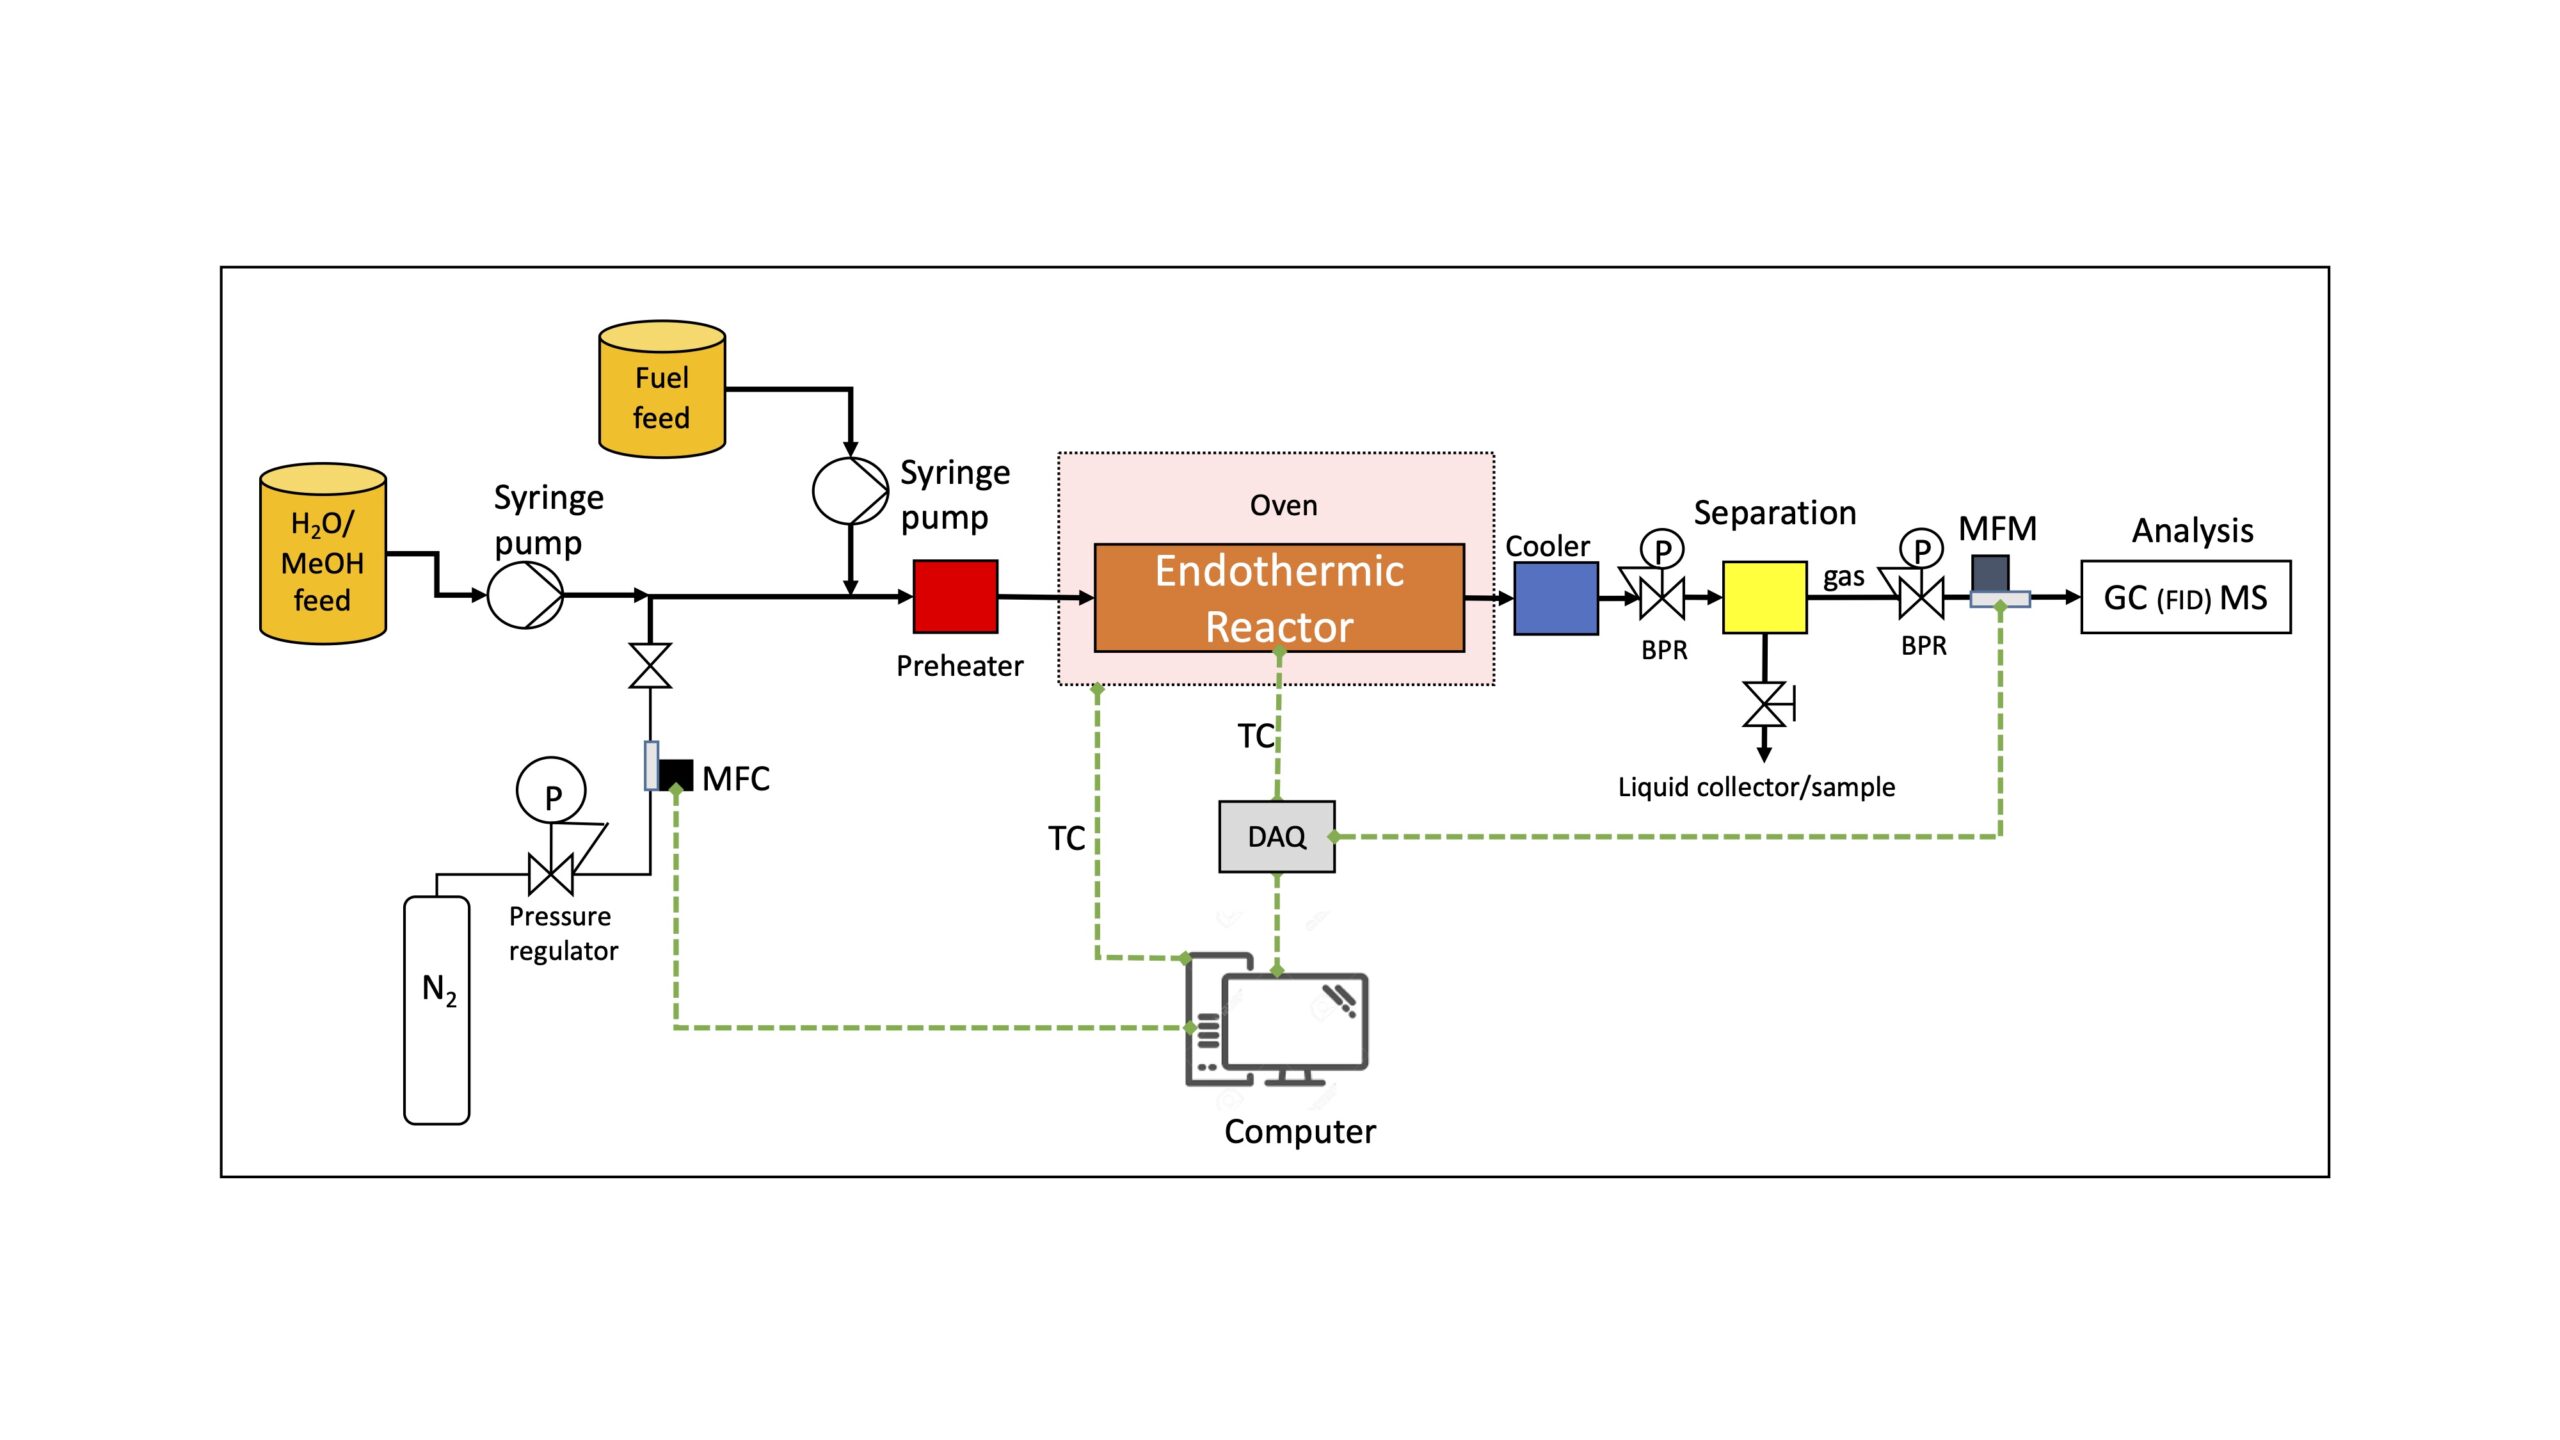 Process flow diagram of the experimental system